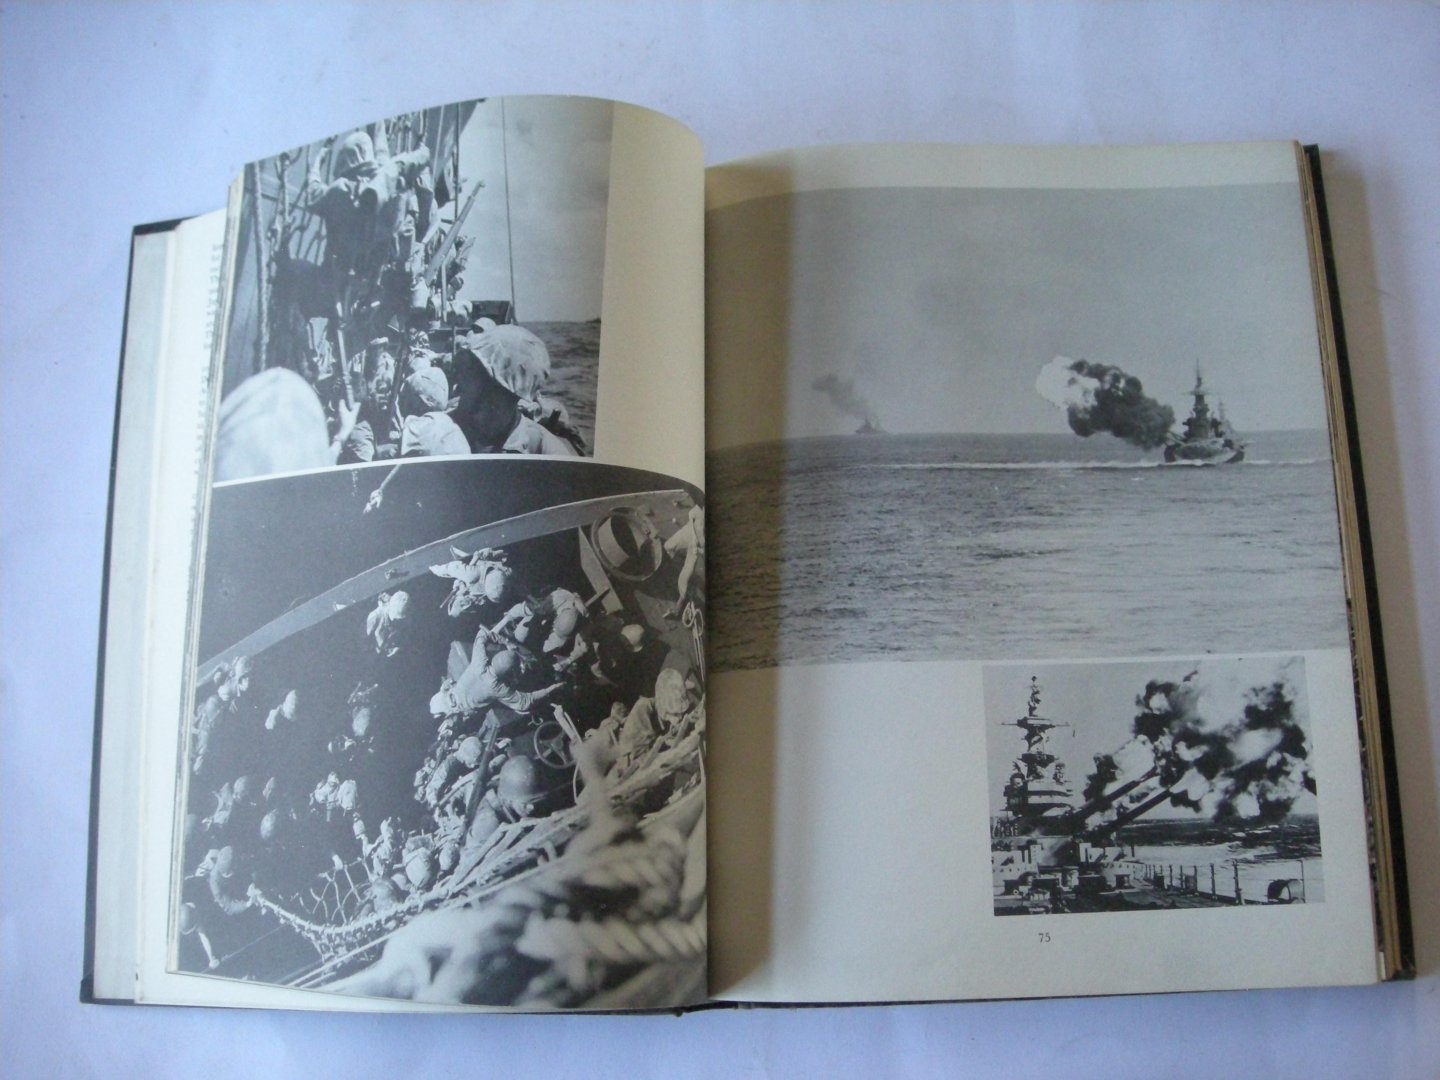 Hanser, R. text / Salomon,H. with Hanser,R. captions / Osborn, C. sel.Photographs - Victory at Sea 8 (World War II - first a television series)